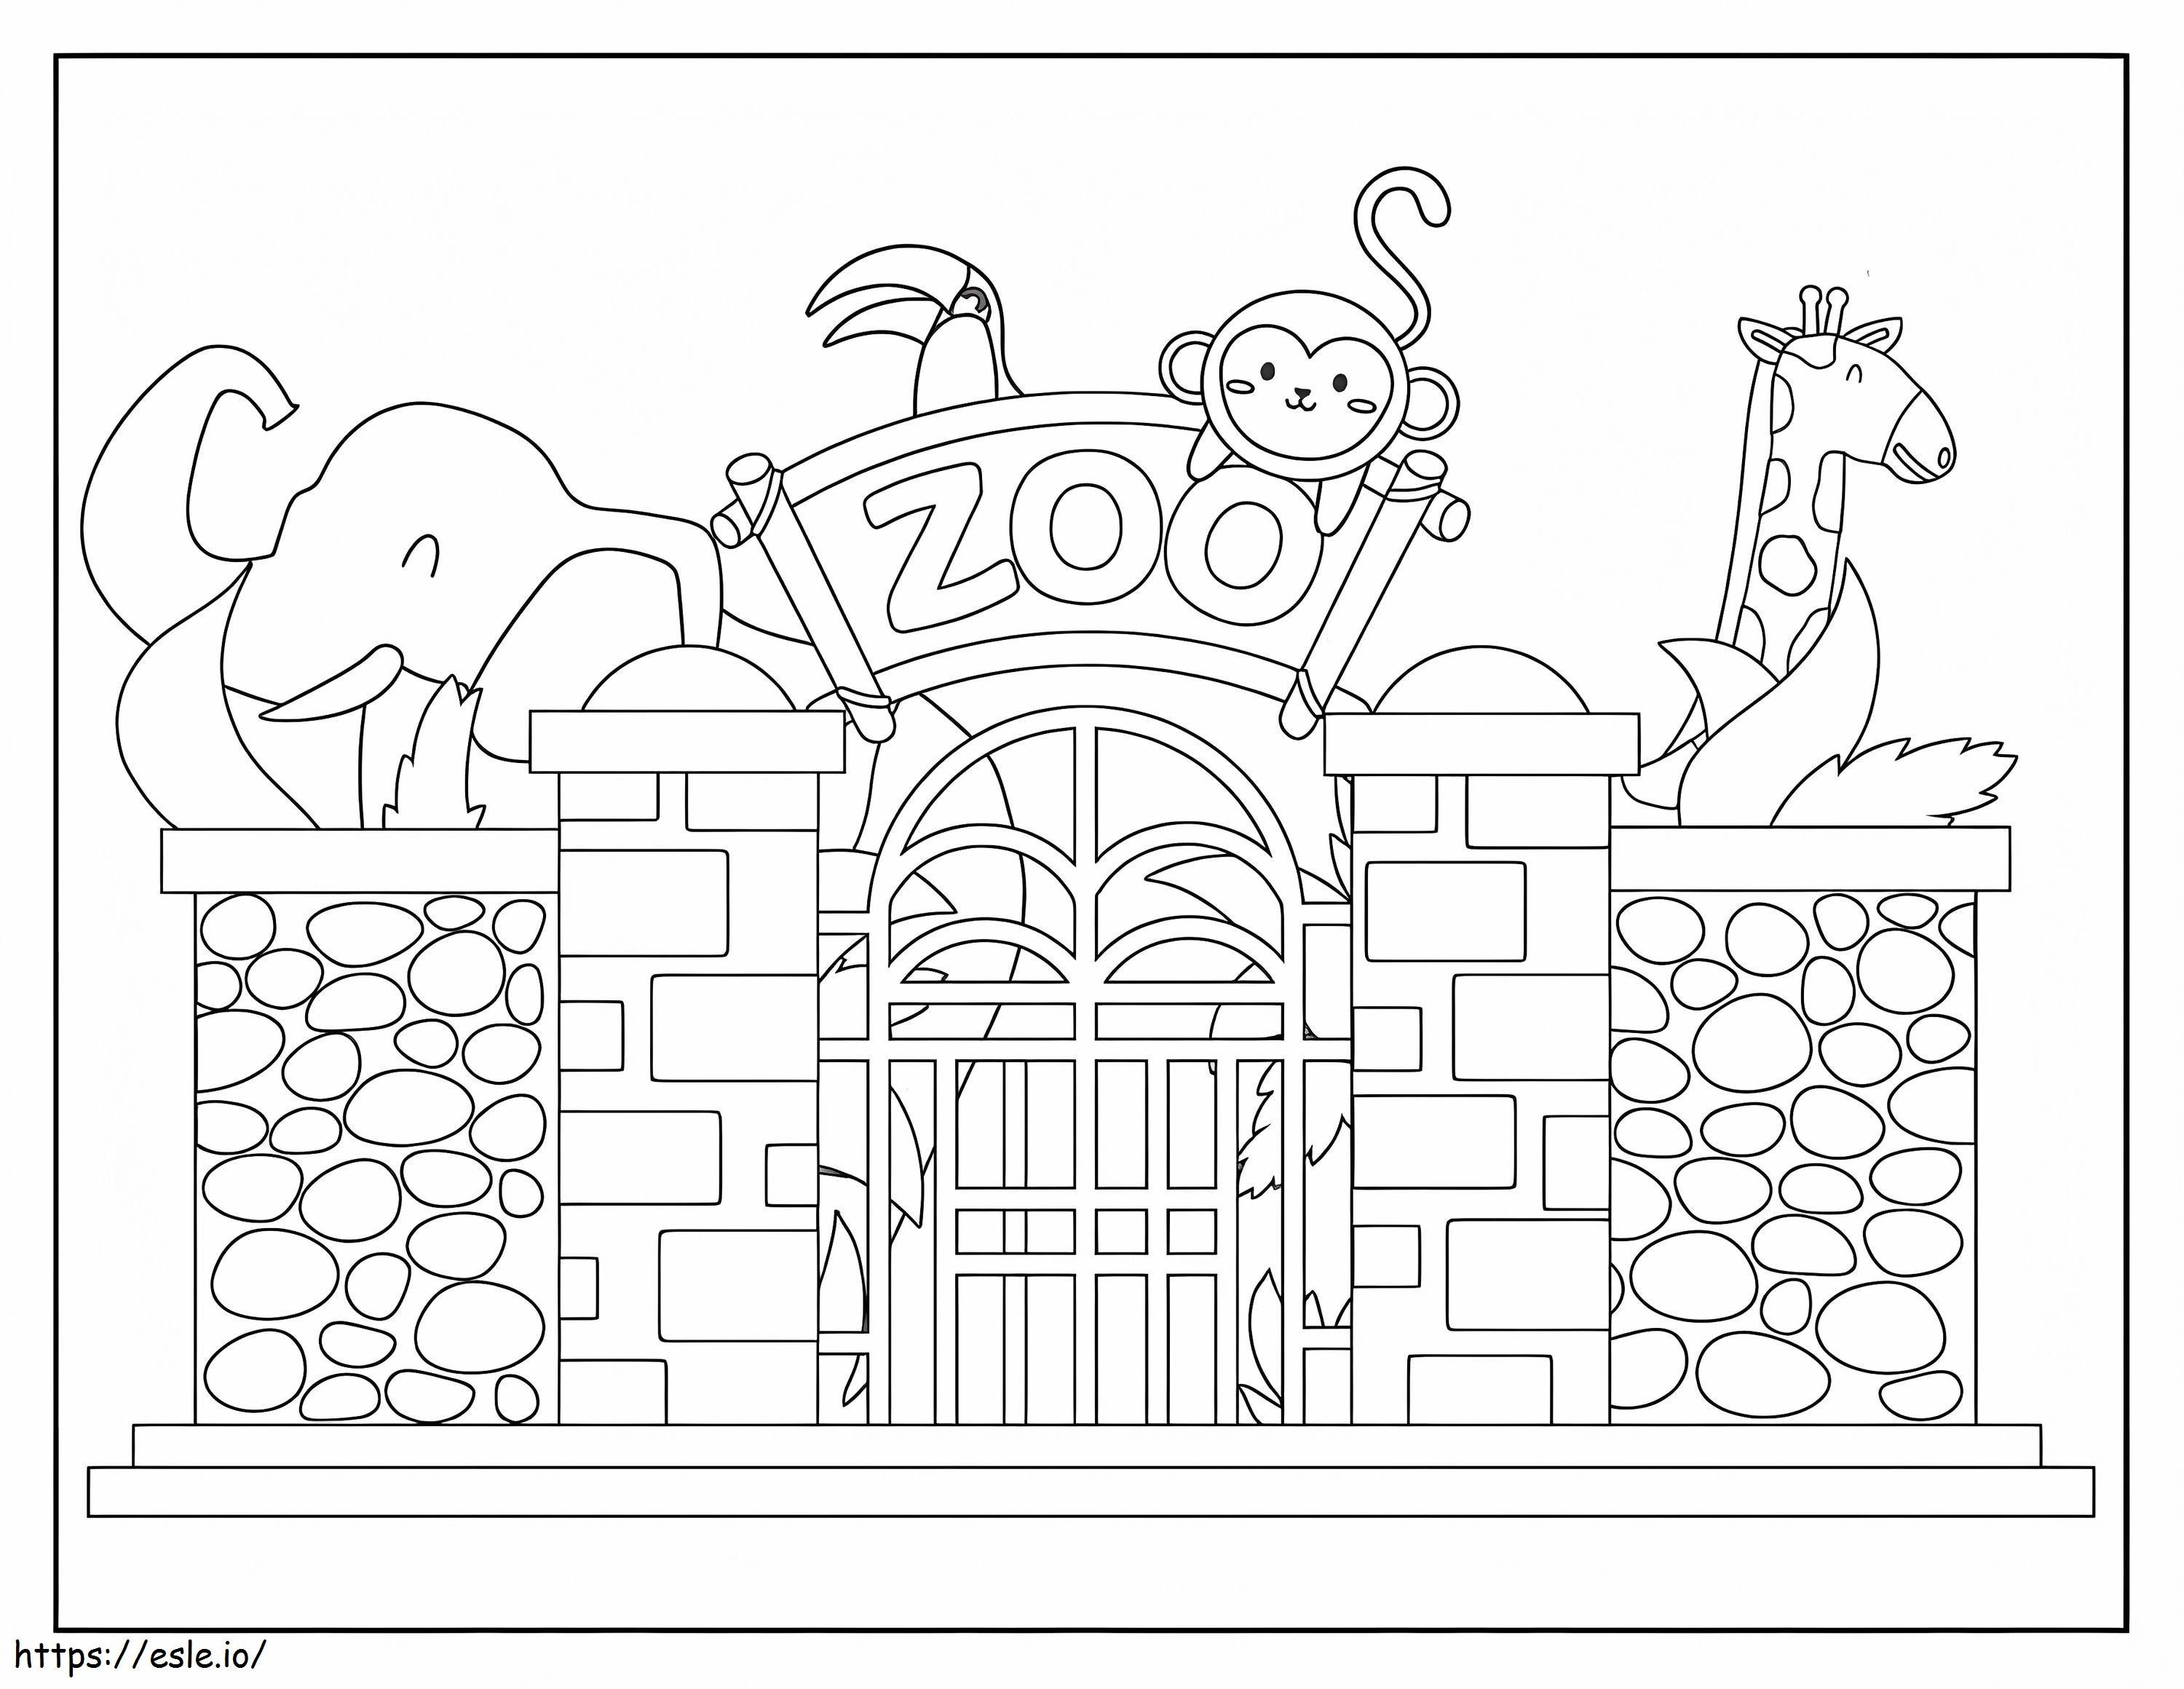 Impressive Zoo coloring page